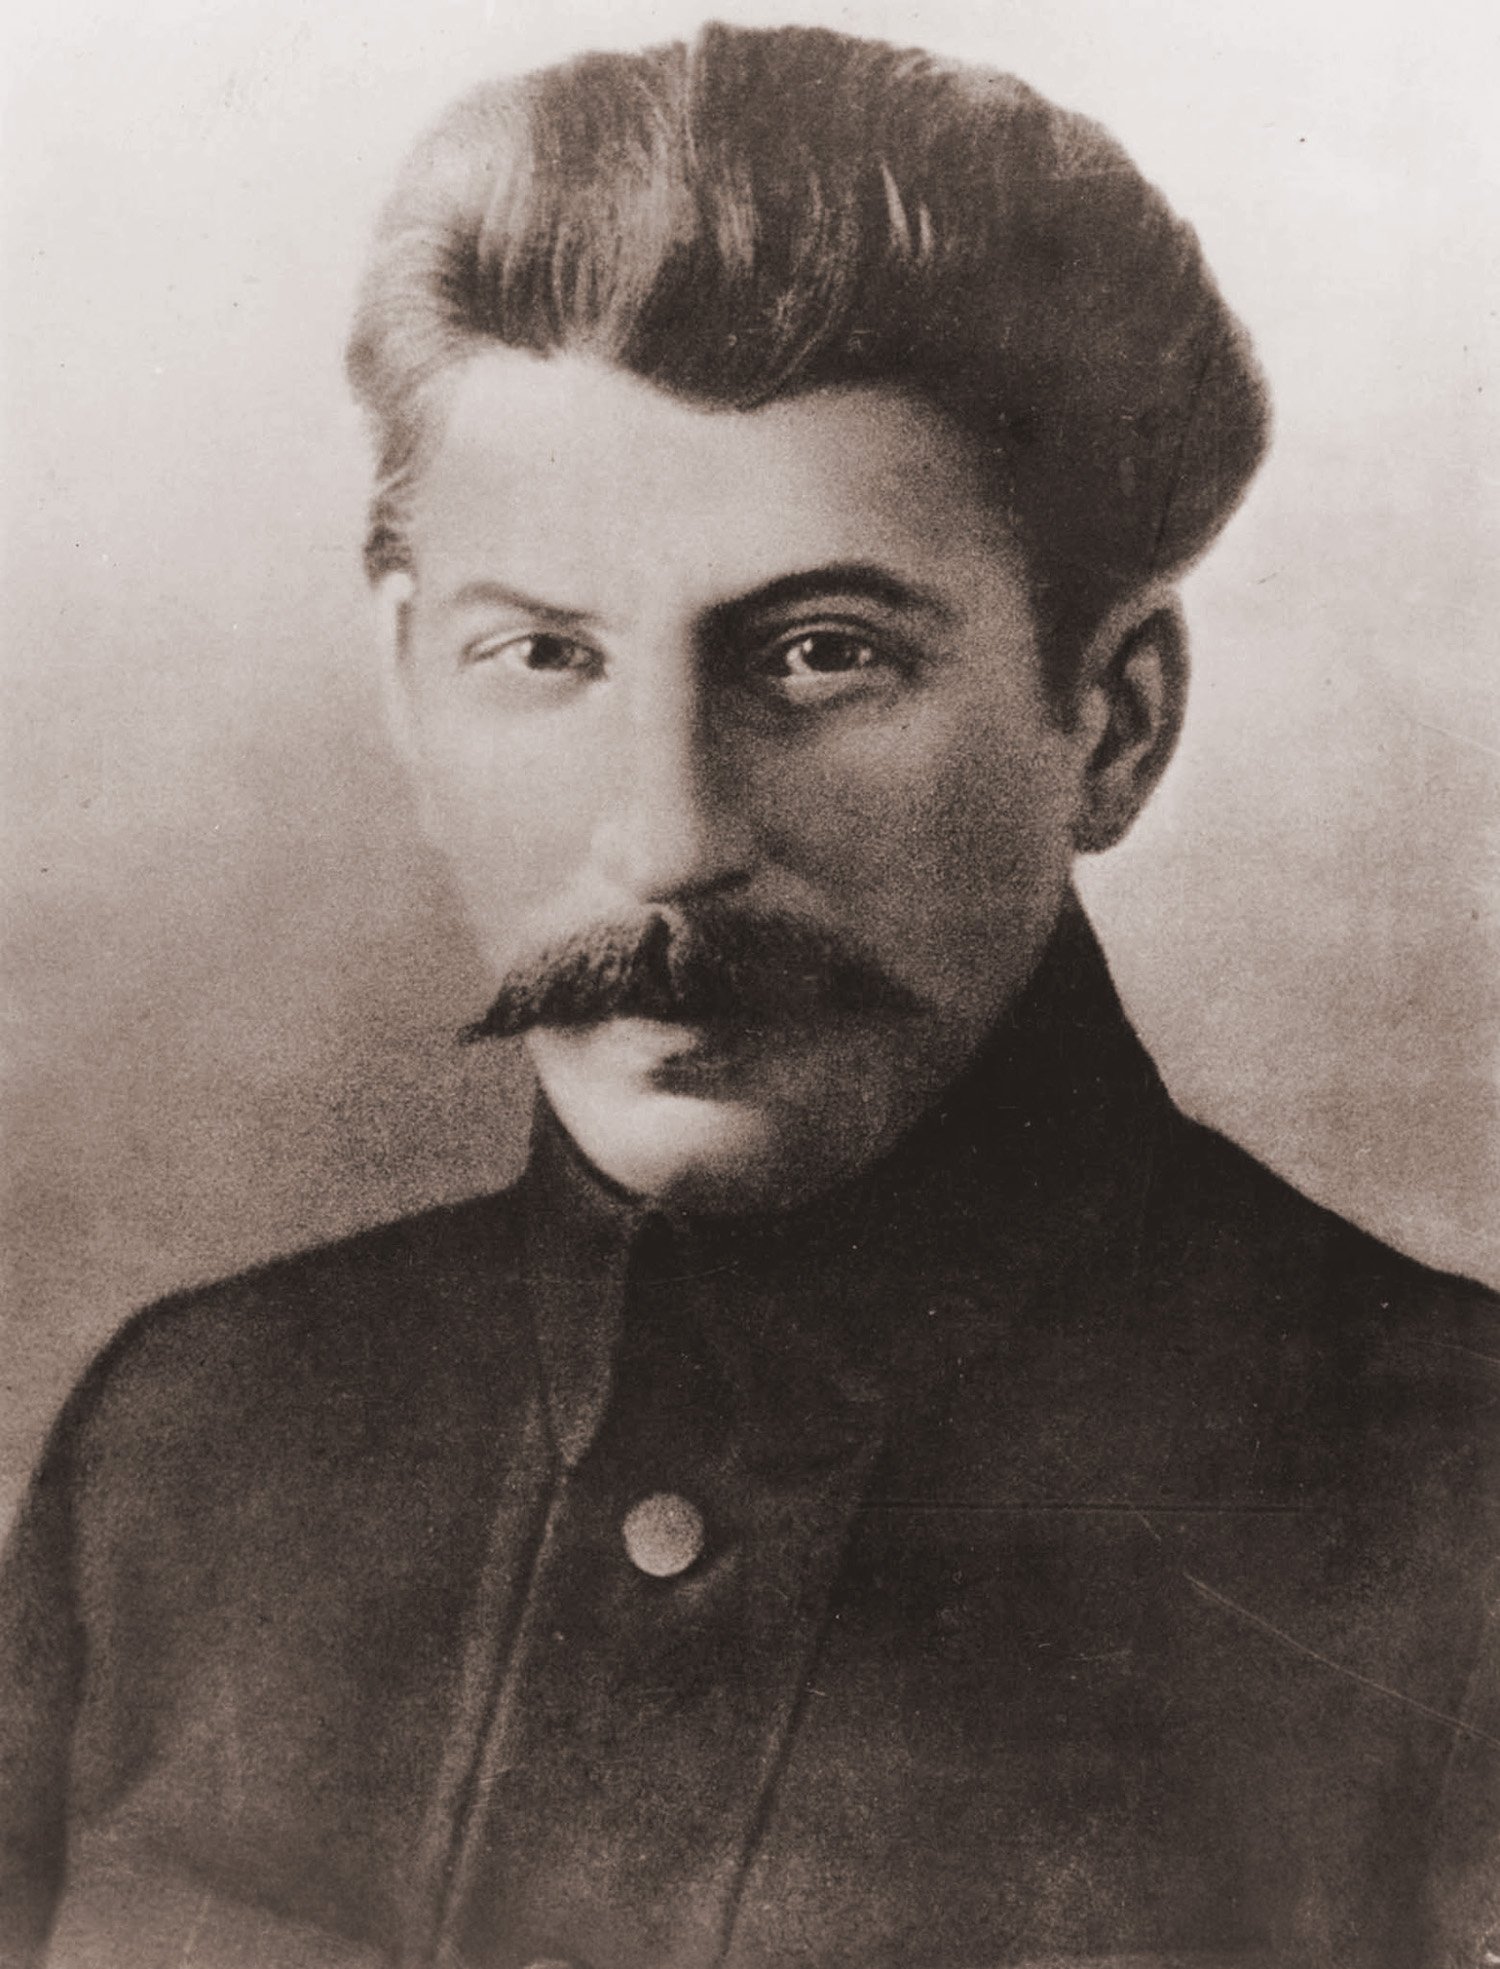 Sepia-toned portrait of a young Joseph Stalin from 1917, featuring his distinct mustache and a prominent swept-back hairstyle. He is wearing a dark jacket with a buttoned collar.